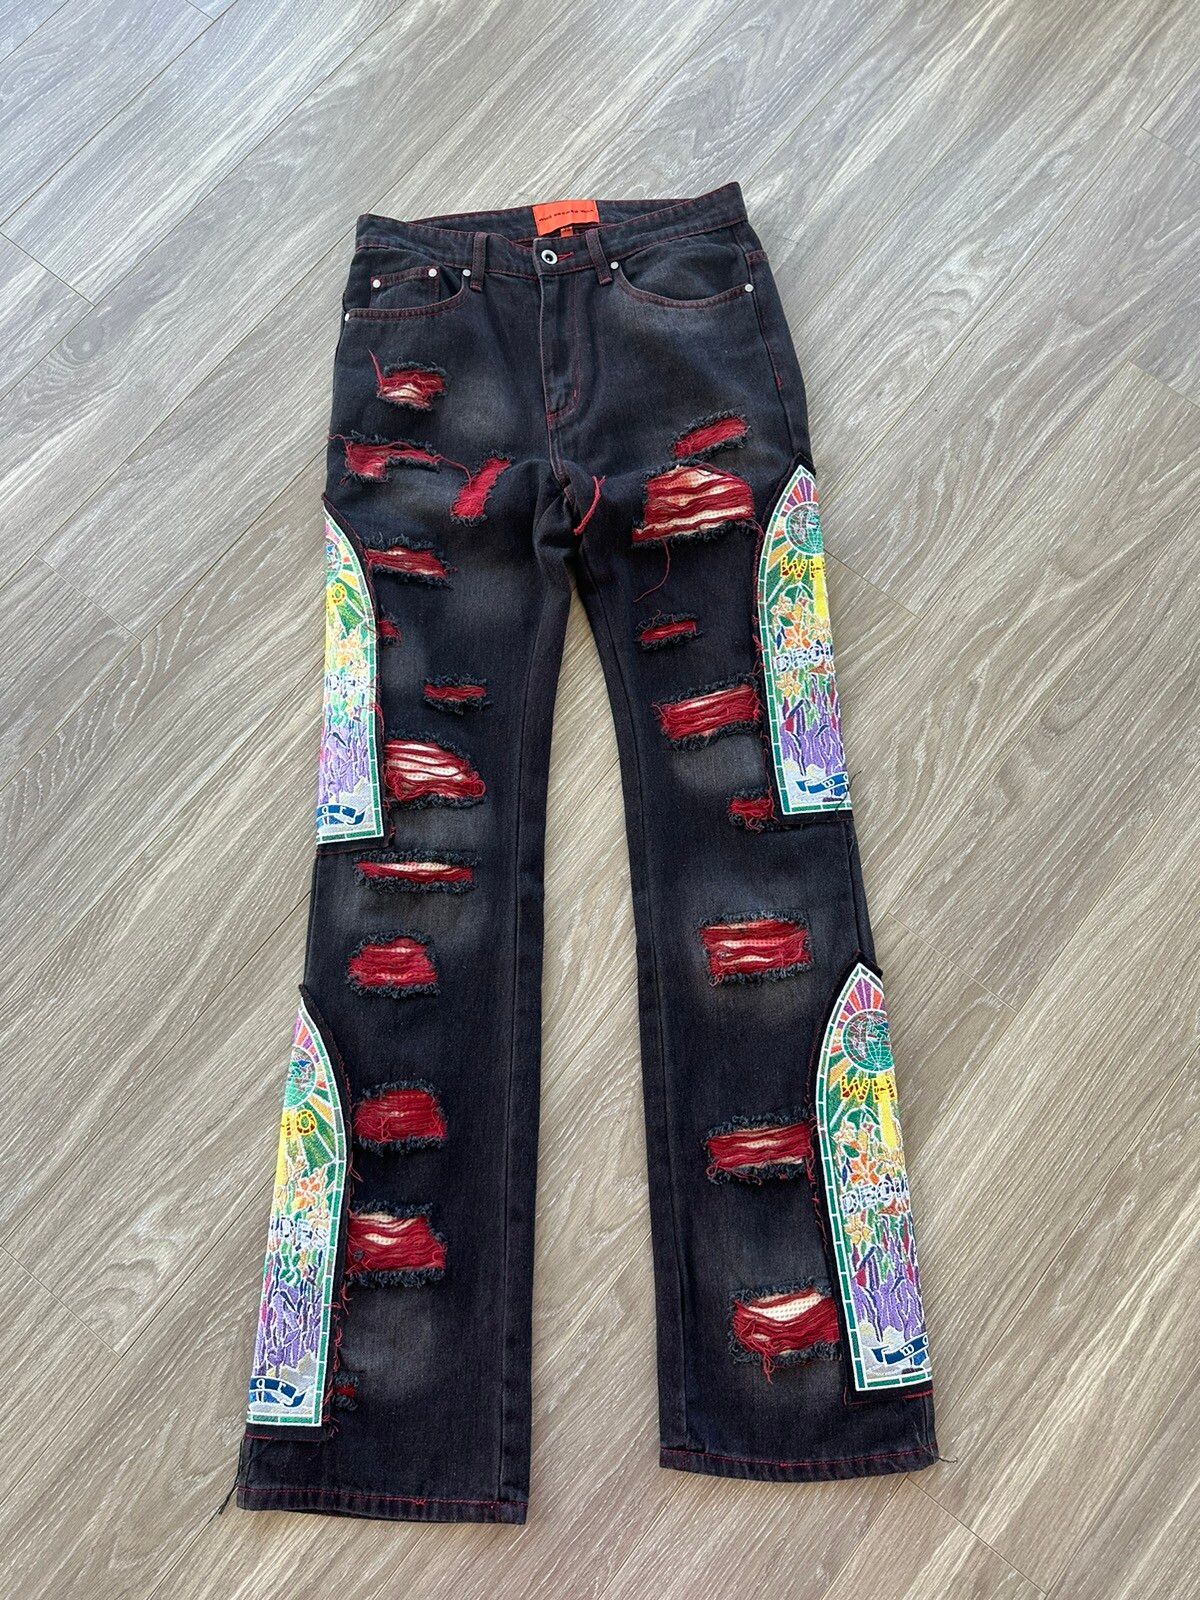 Vlone WHO DECIDES WAR JEANS | Grailed